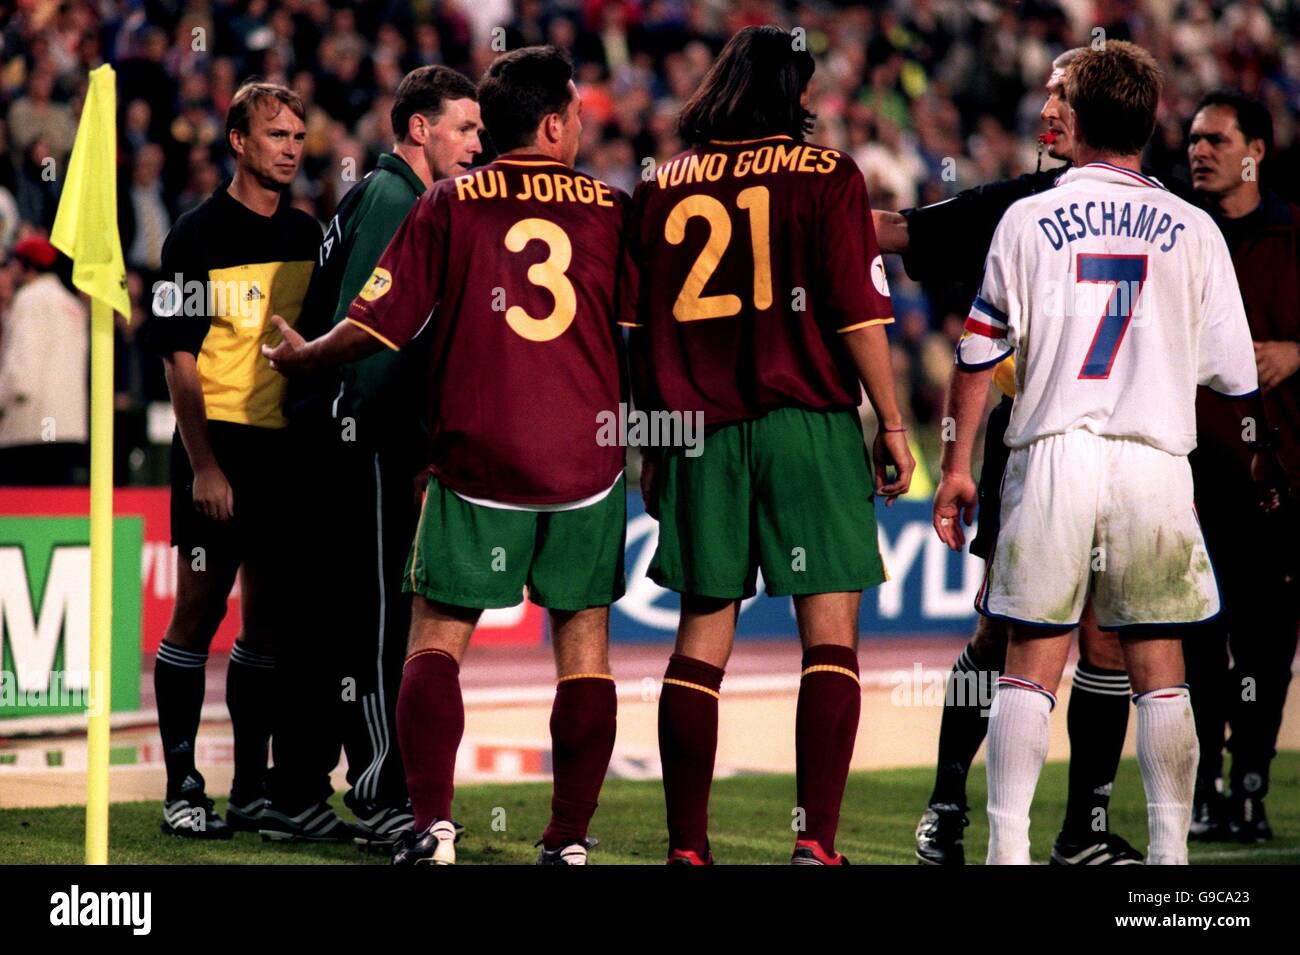 Linesman Igor Sramka (l) is protected from Portugal's Rui Jorge (no3) and Nuno Gomes (no21) by the fourth official Hugh Dallas (second left) and referee Gunter Benko (second right), after a penalty was awarded against Portugal in the 'golden goal' period of the match Stock Photo